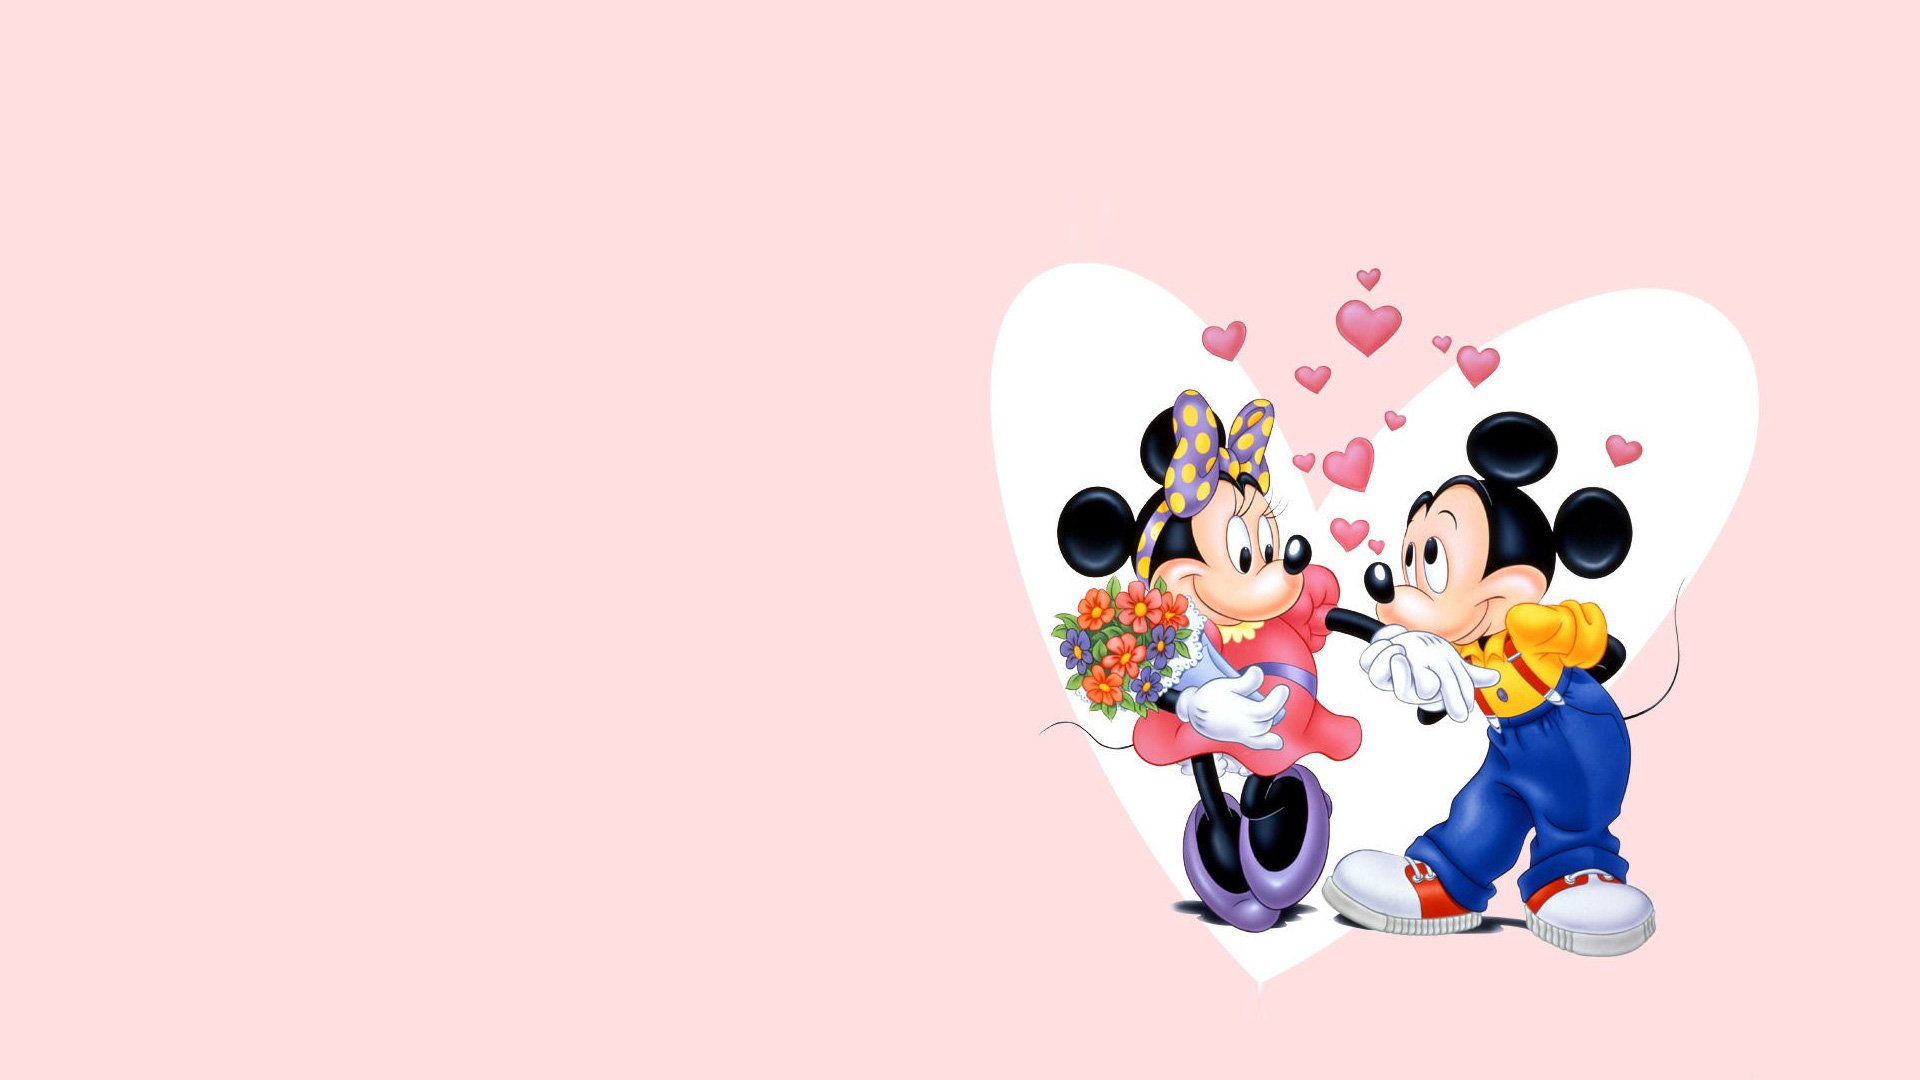  1920 x 1080 Minnie Mouse wallpaper image and choose Set as Background